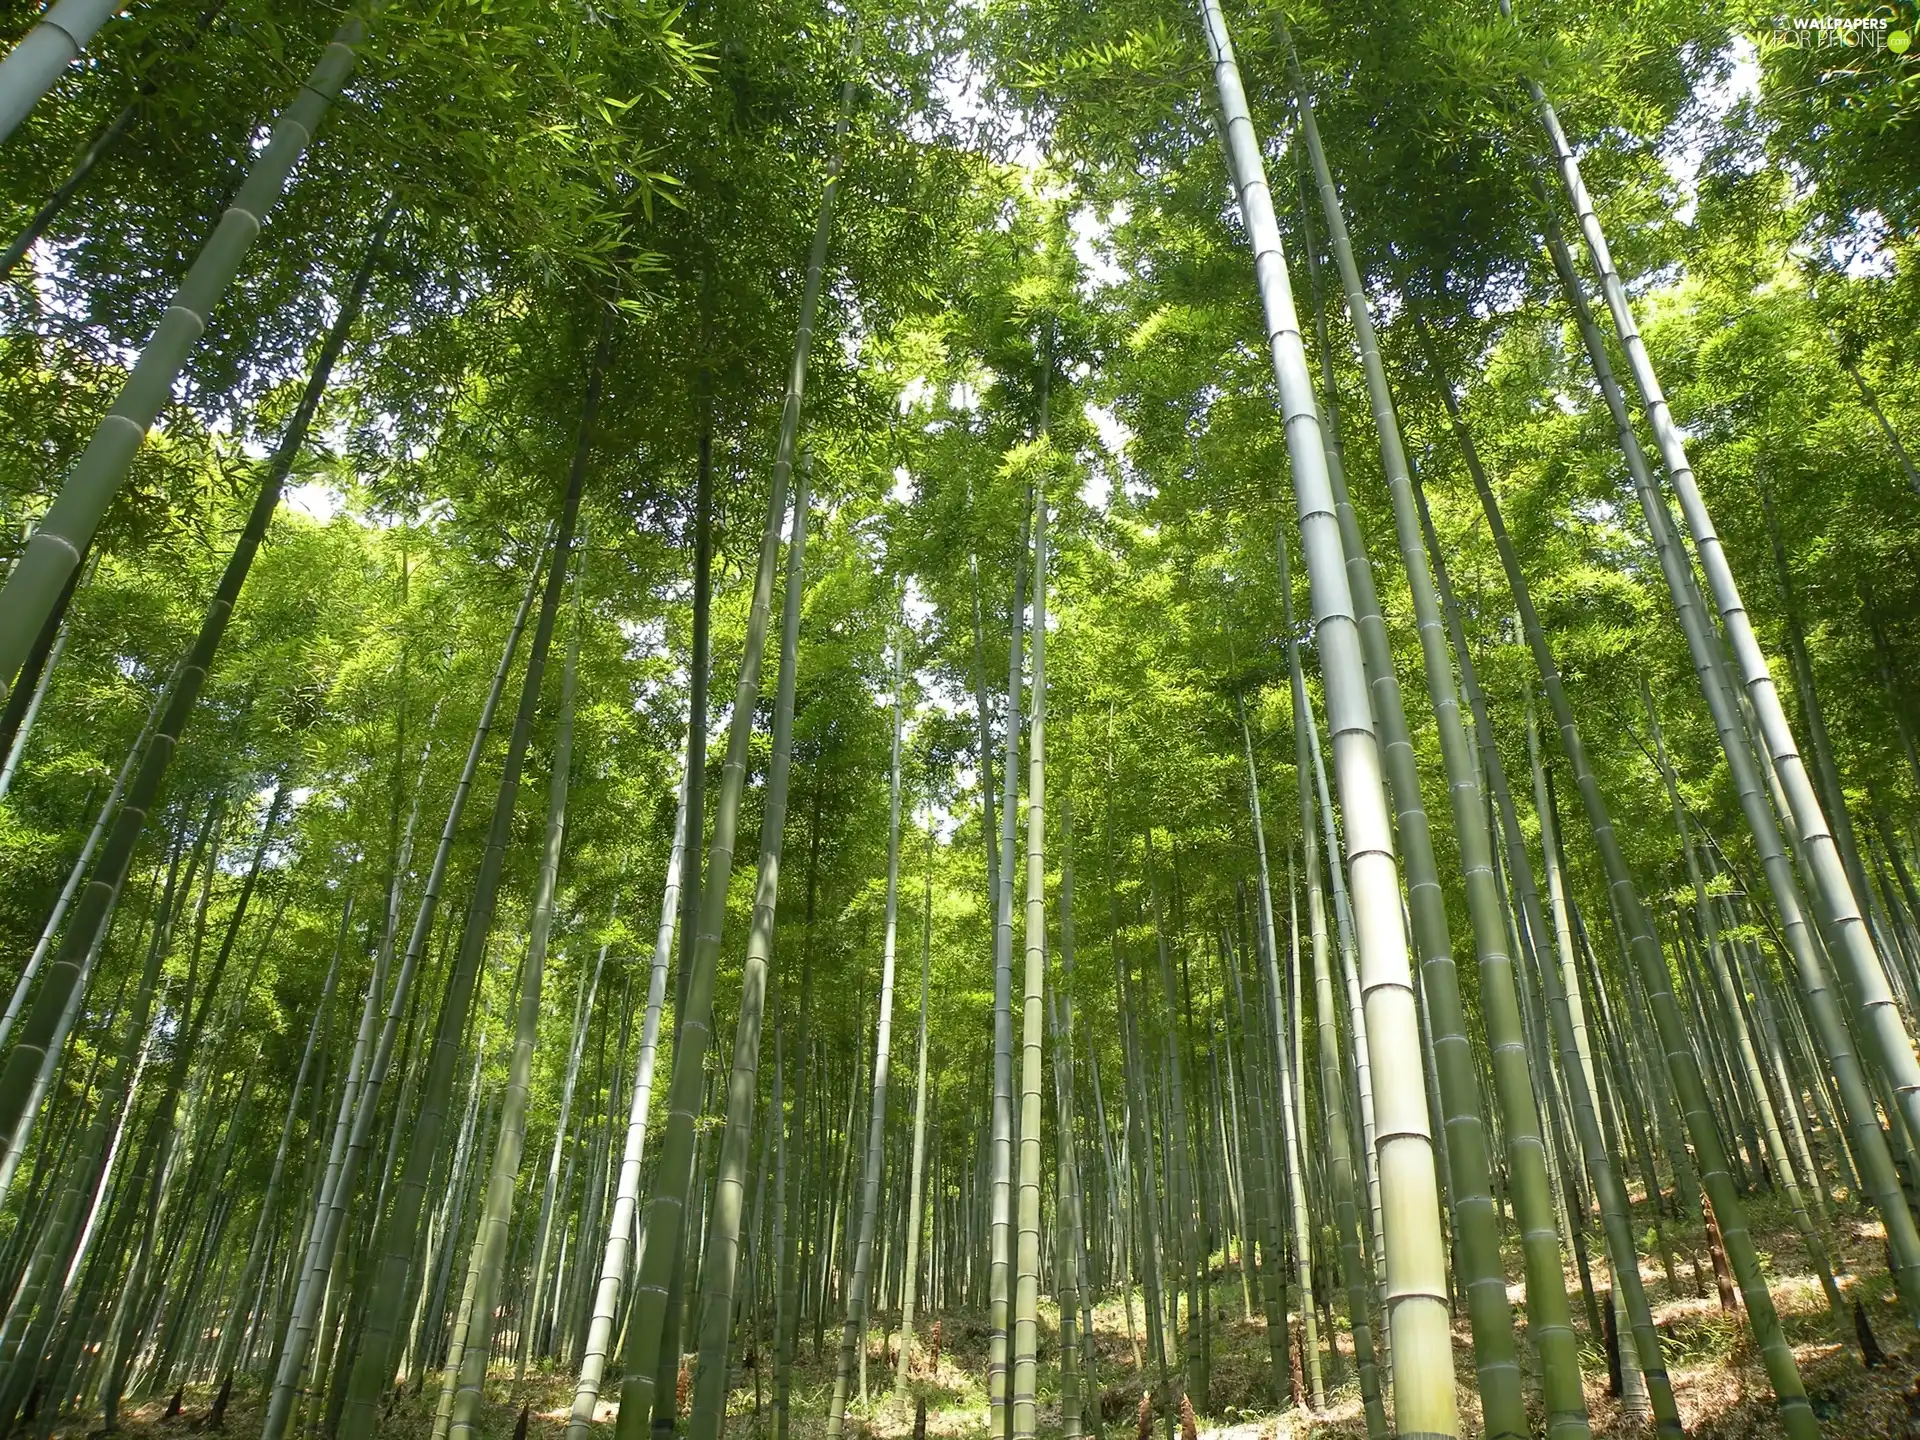 forest, bamboo